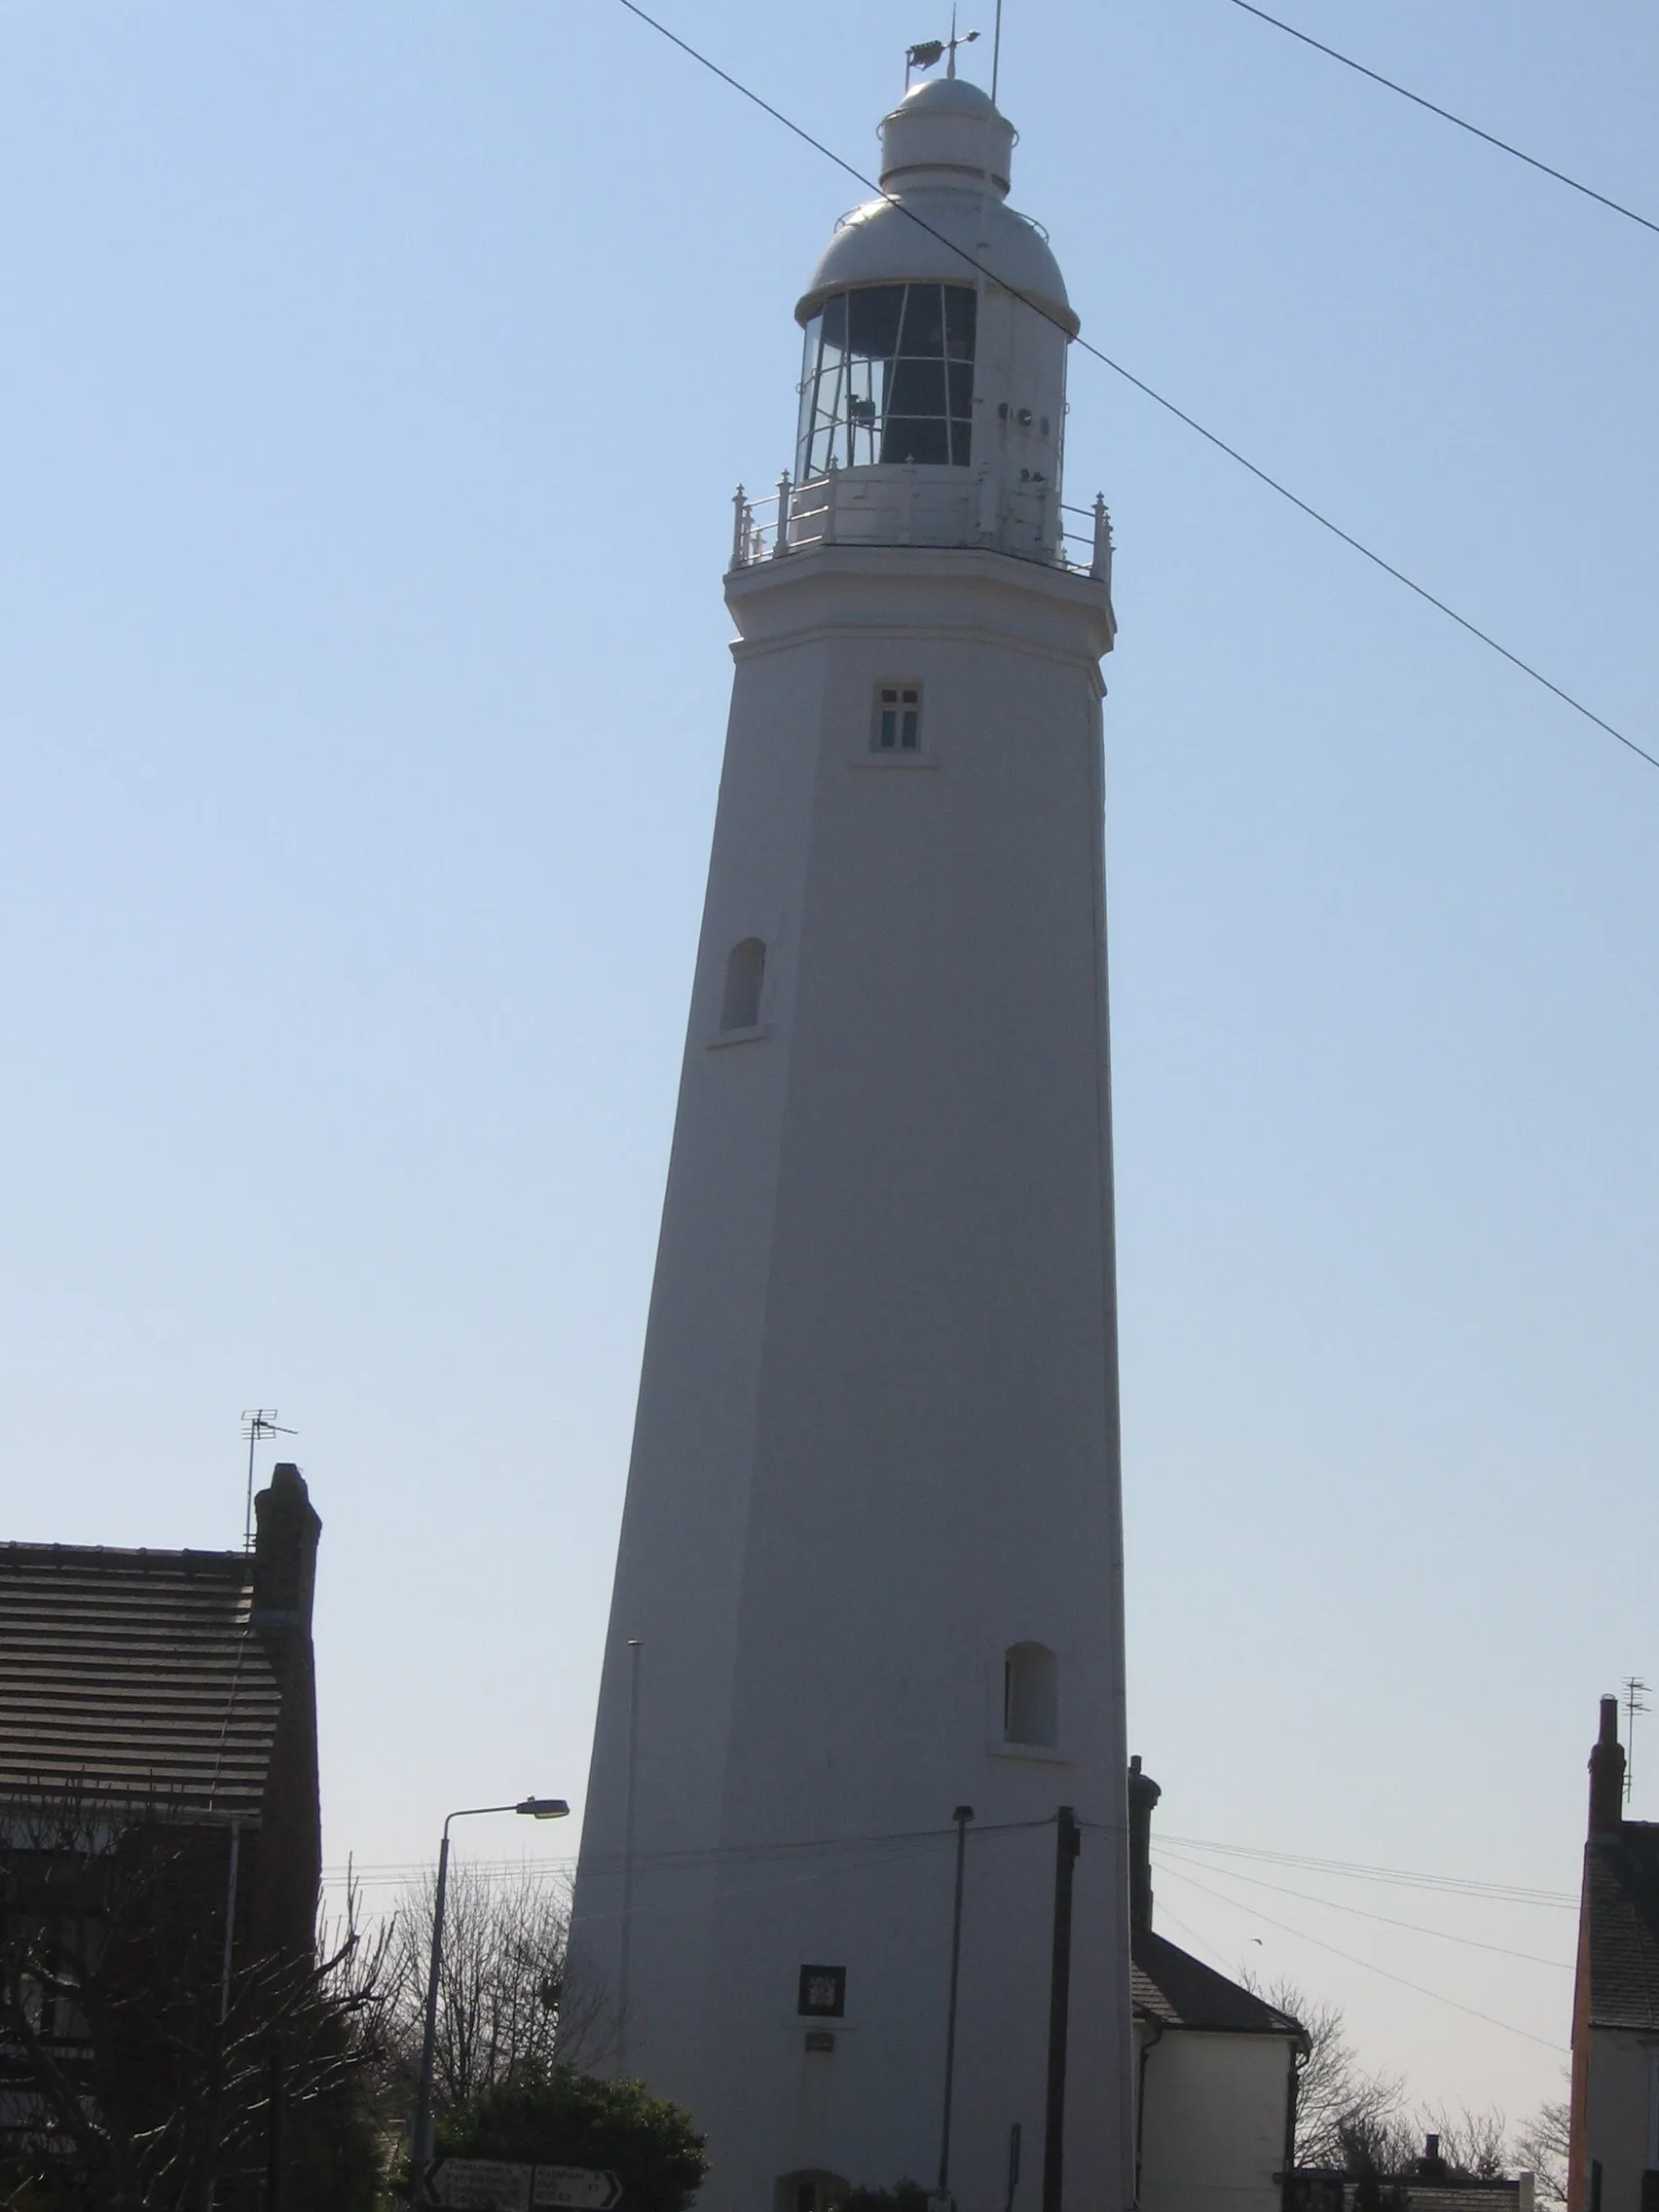 Photo showing: Withernsea Lighthouse, Withernsea, East Riding of Yorkshire, England.. Photo taken by me on 07 April 2007.